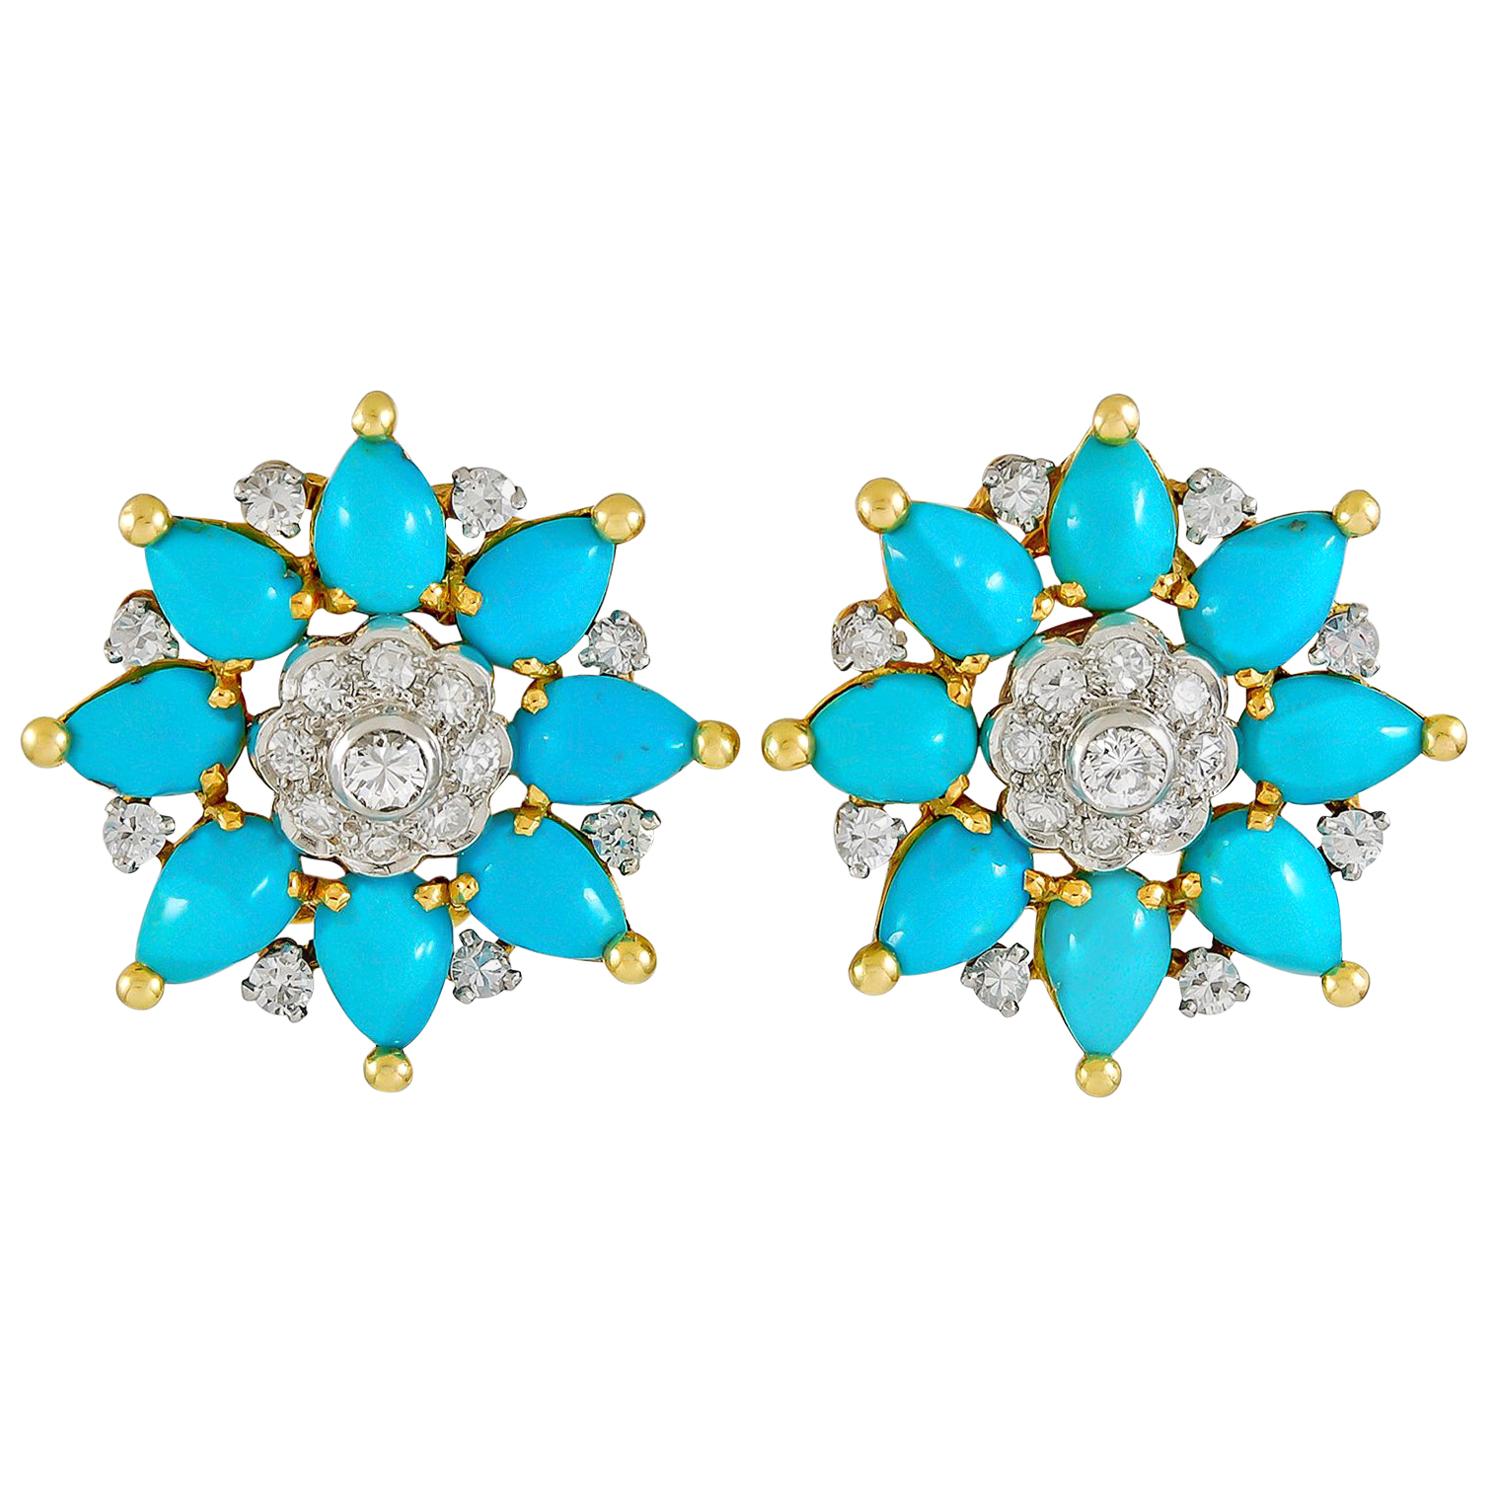 Marchak Diamond and Turquoise Ear Clips For Sale